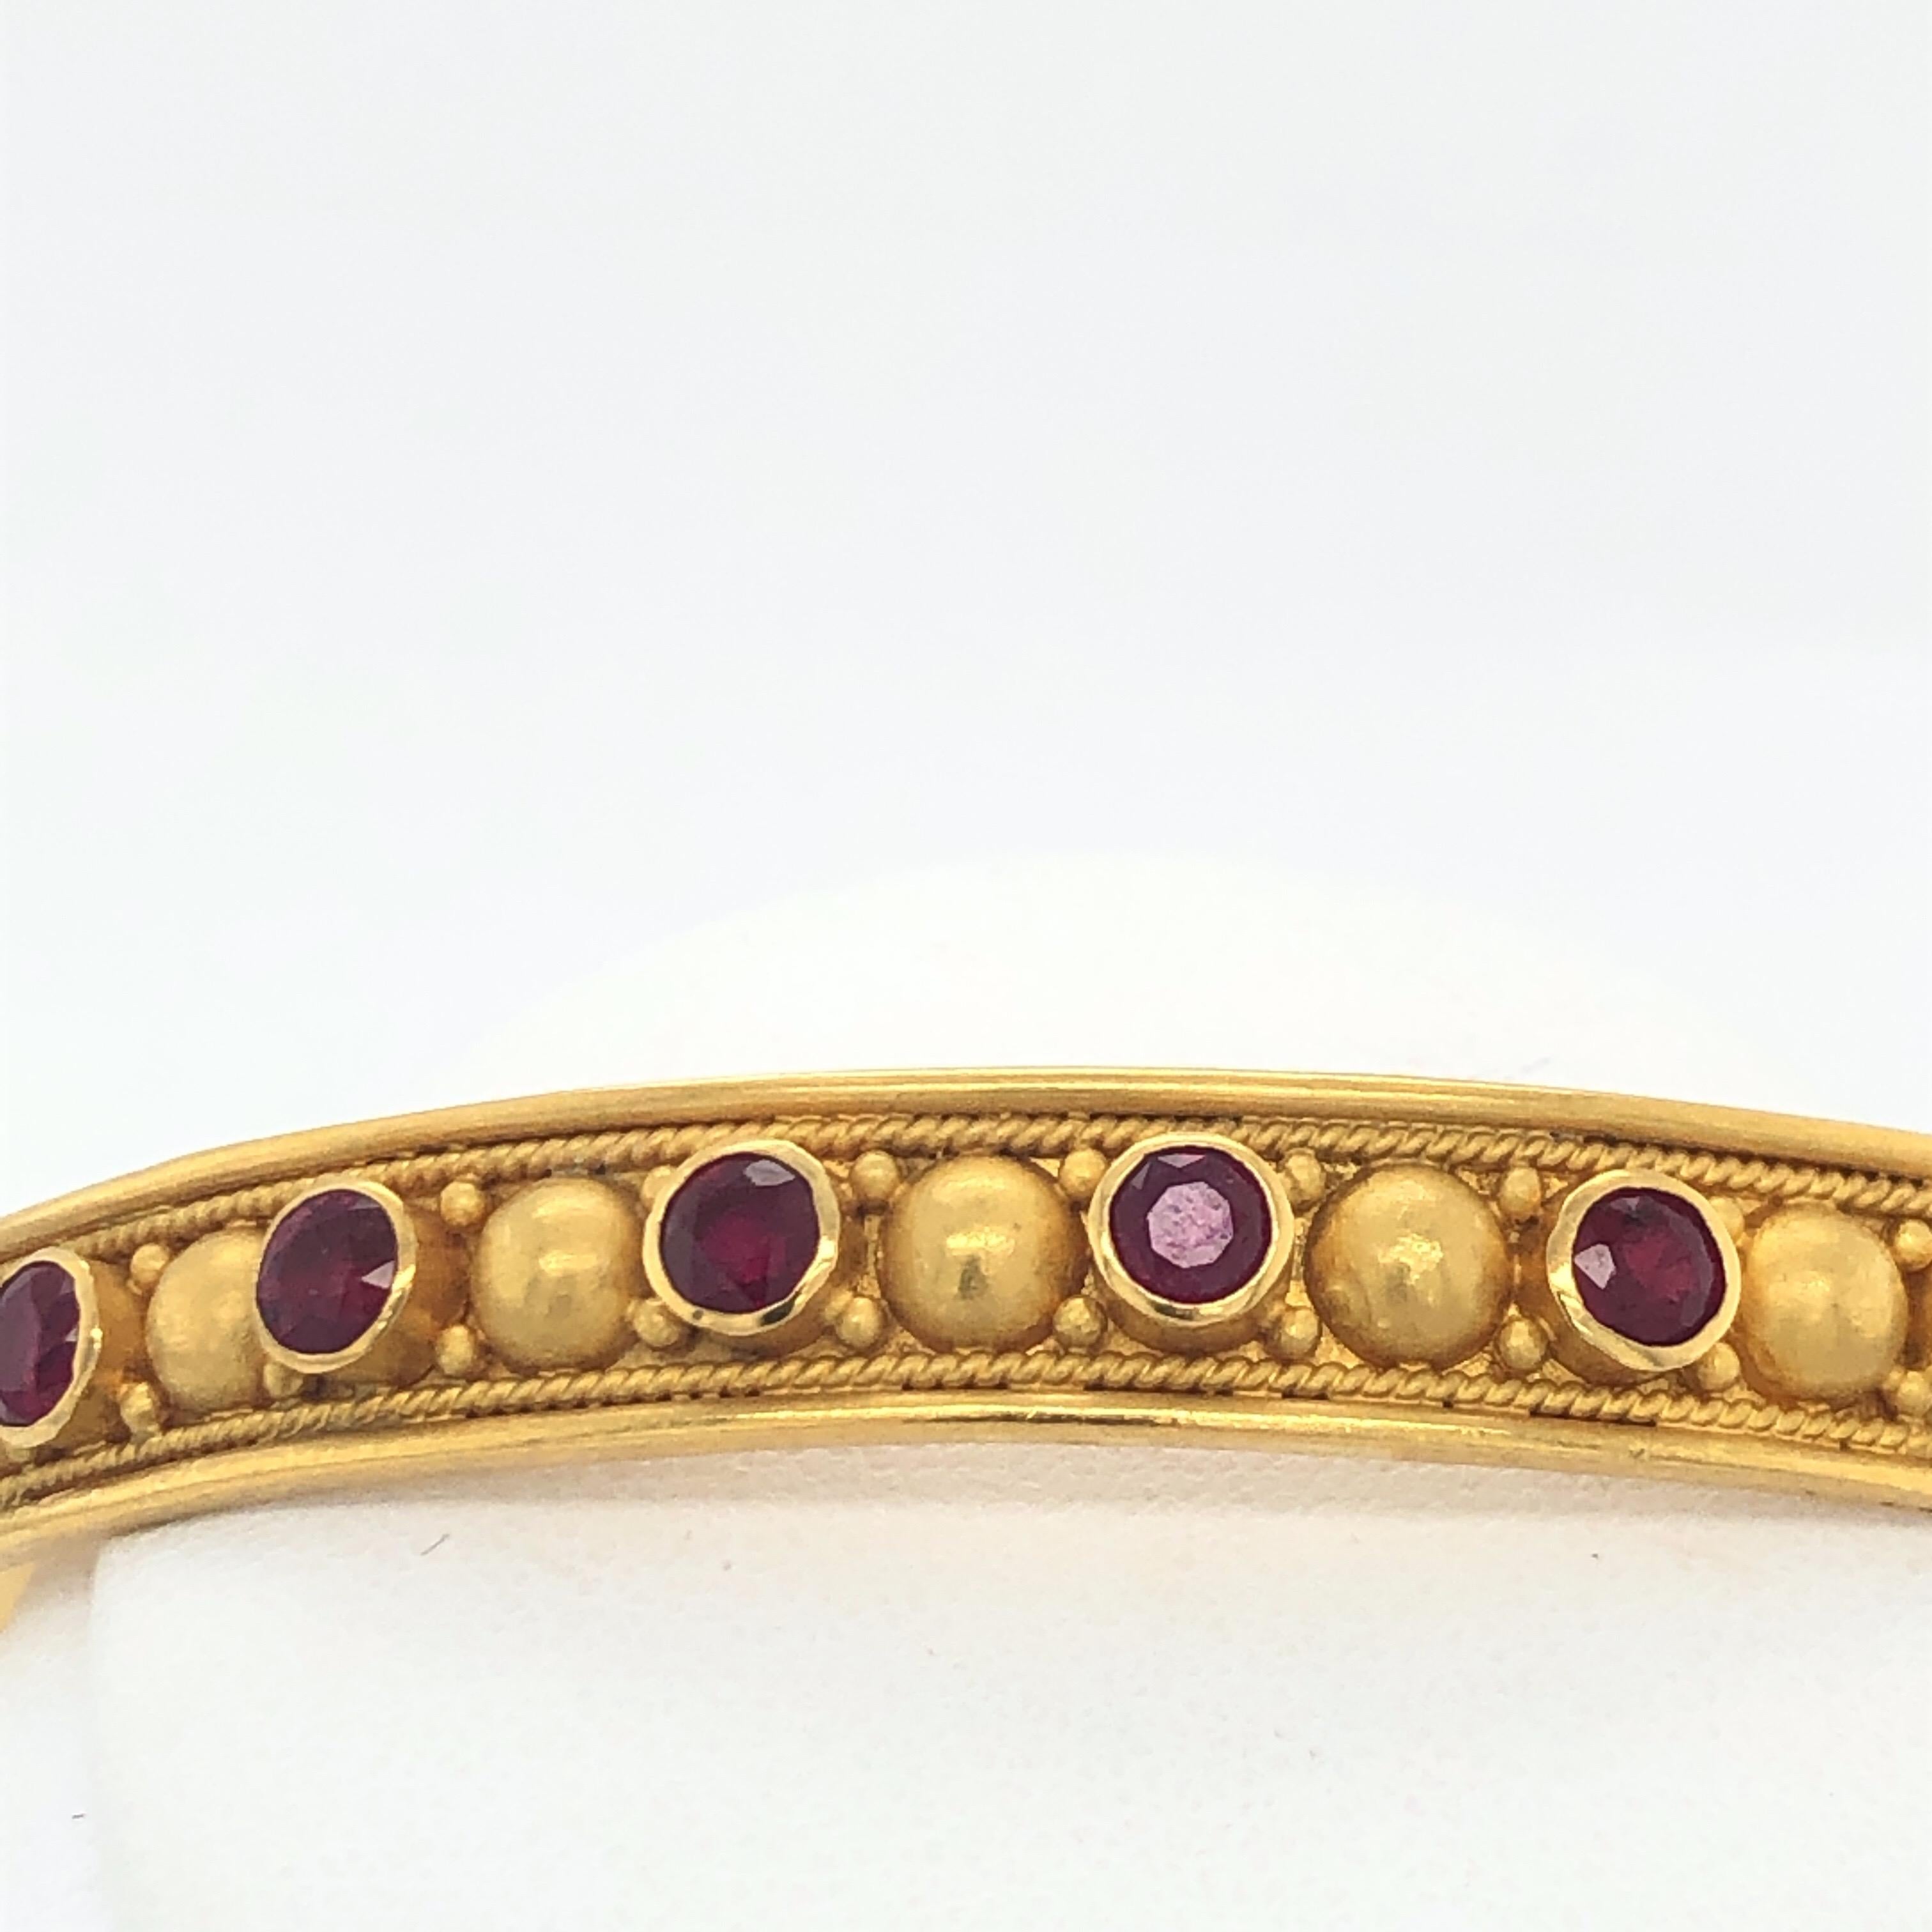 Gorgeous Carolyn Tyler 18 and 22K Gold Bangle Bracelet with Rubies. 5.9CT Rubies.   Signature Carolyn Tyler Style with gorgeous and has the exquisite detailed work including the 22K granulation.  8 inches. Stamped C Tyler, Indonesia, 18K  22K . 